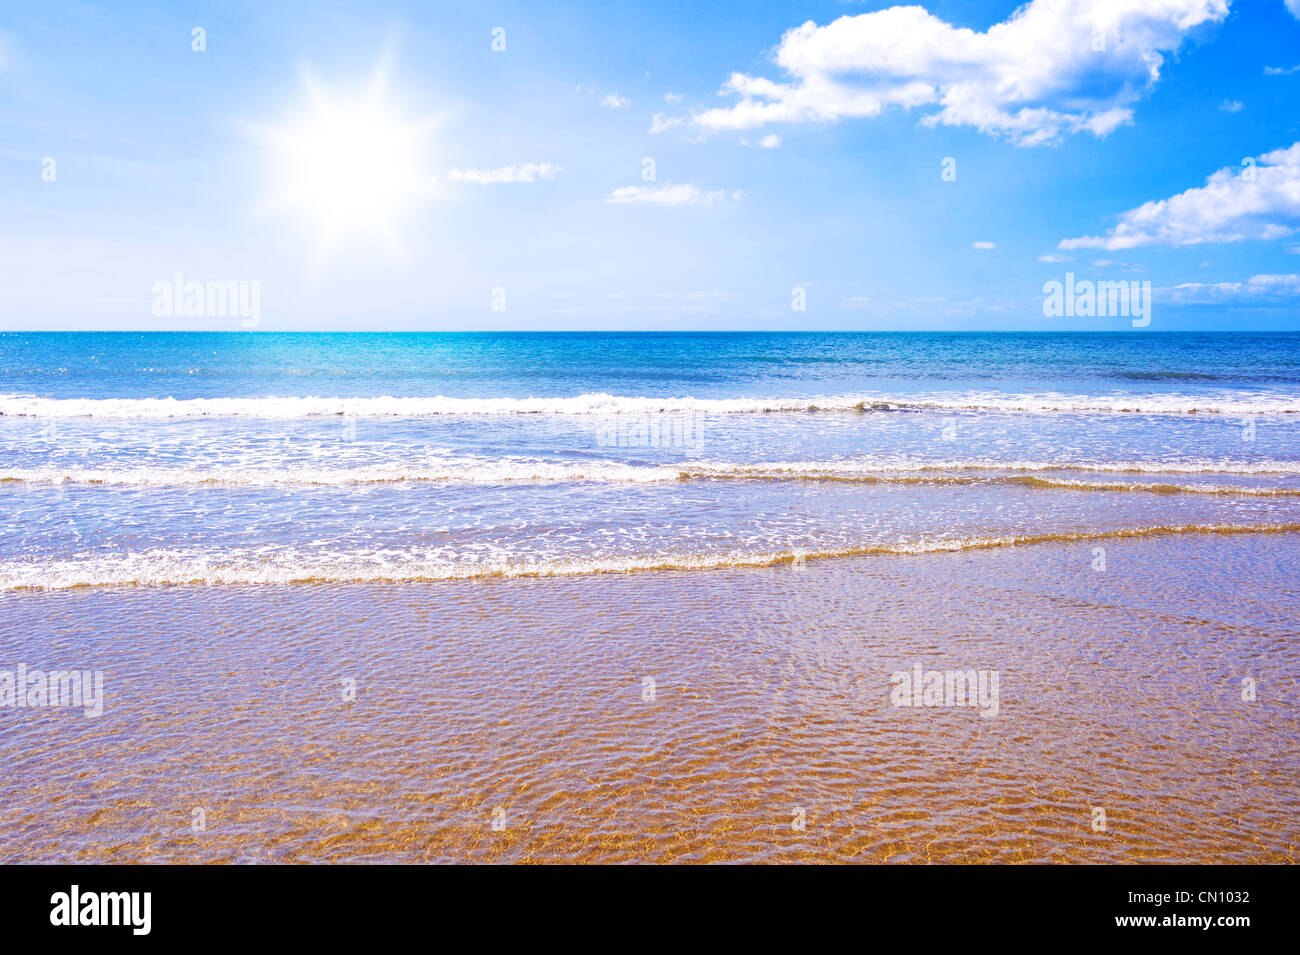 Photo of waves crashing on a golden beach with the sun shining in a blue sky. Stock Photo